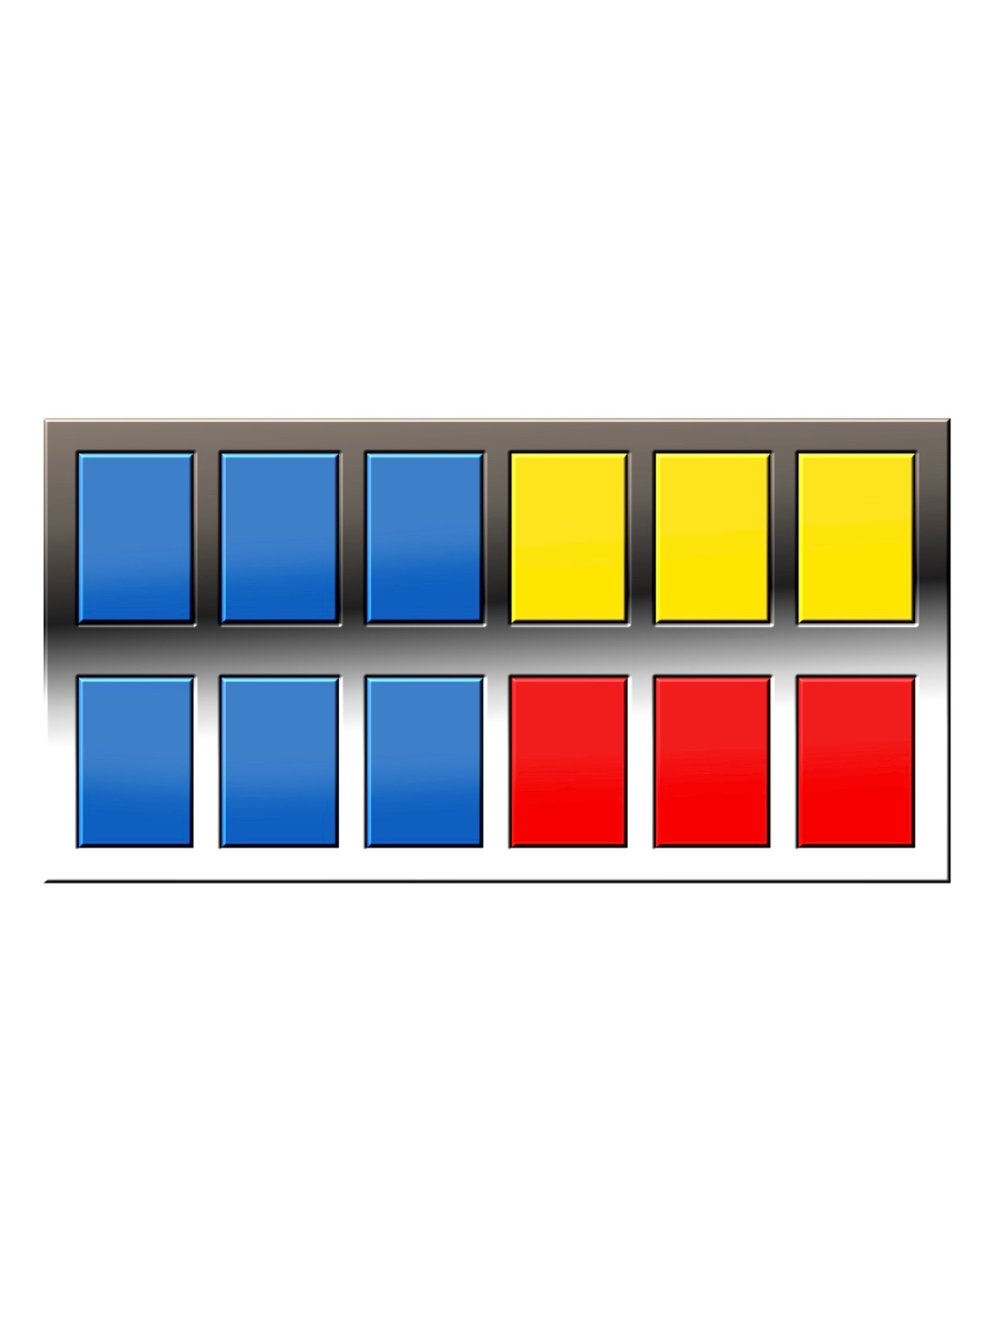 Image of Thrawn Rank Insignia by Deathstyle